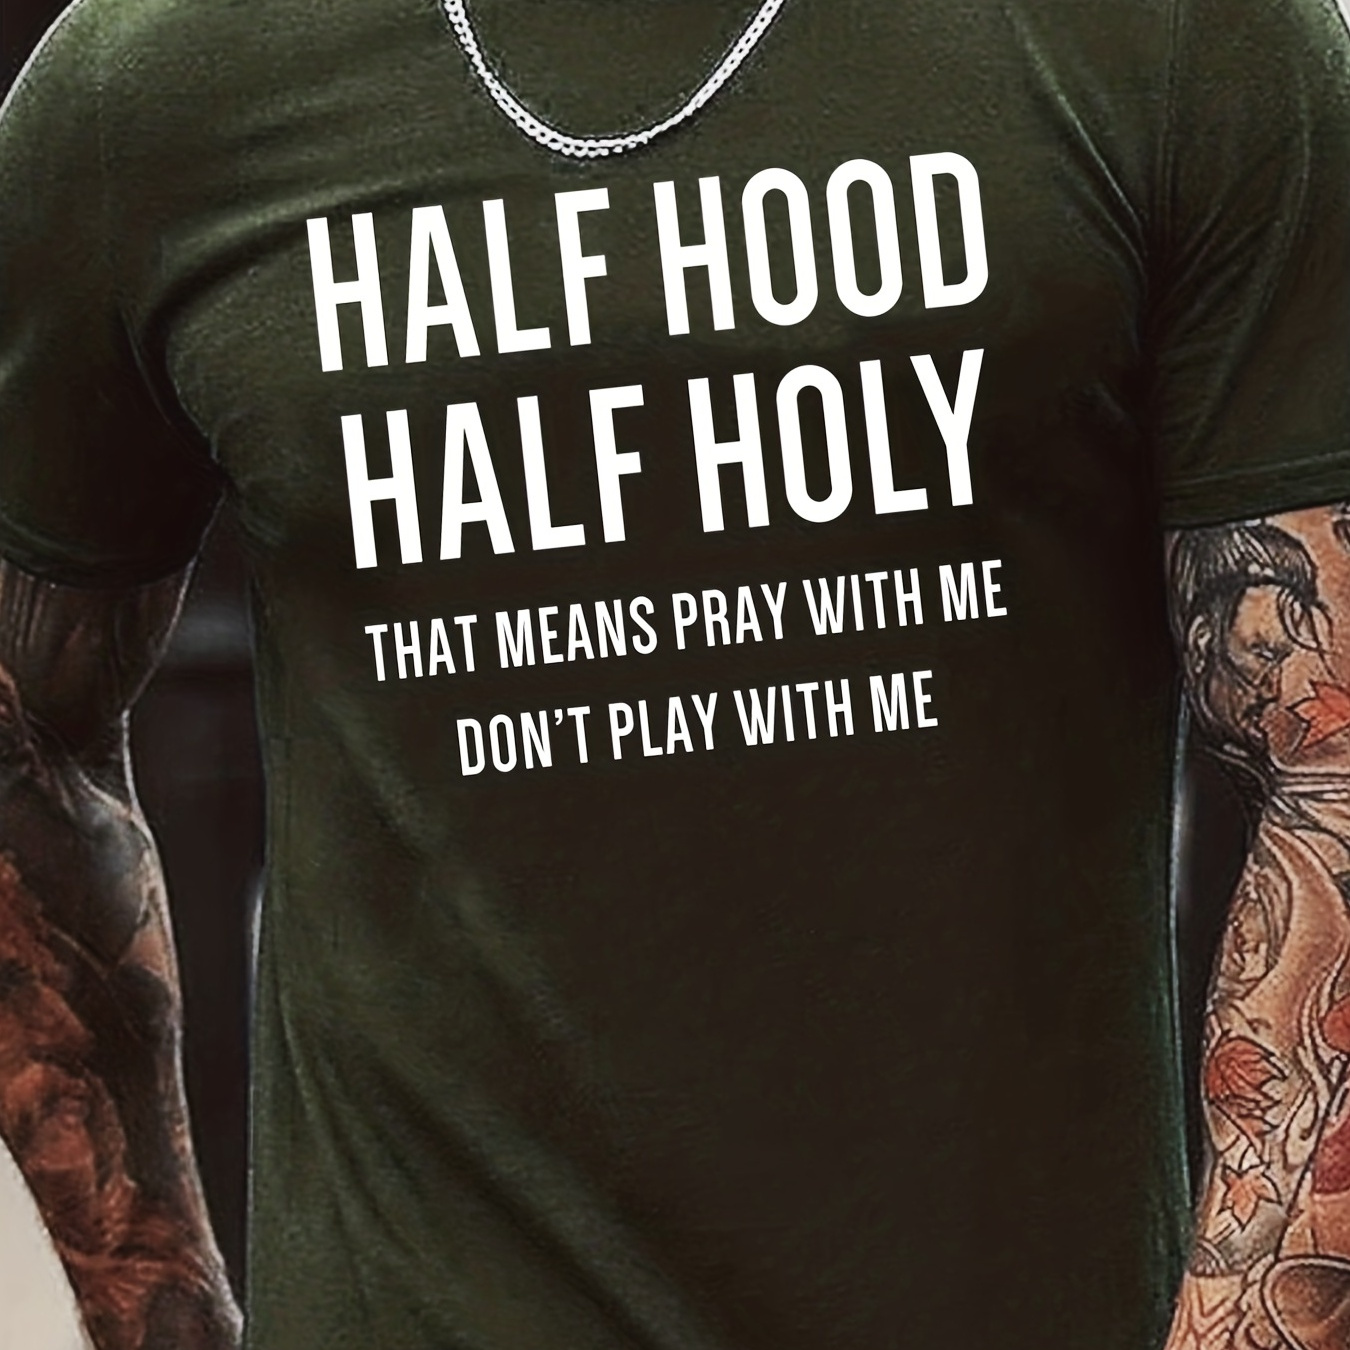 

Tees For Men, Funny 'half Hood, Half Holy' Print T Shirt, Casual Short Sleeve Crew Neck Tshirt For Summer Spring Fall, Tops As Gifts